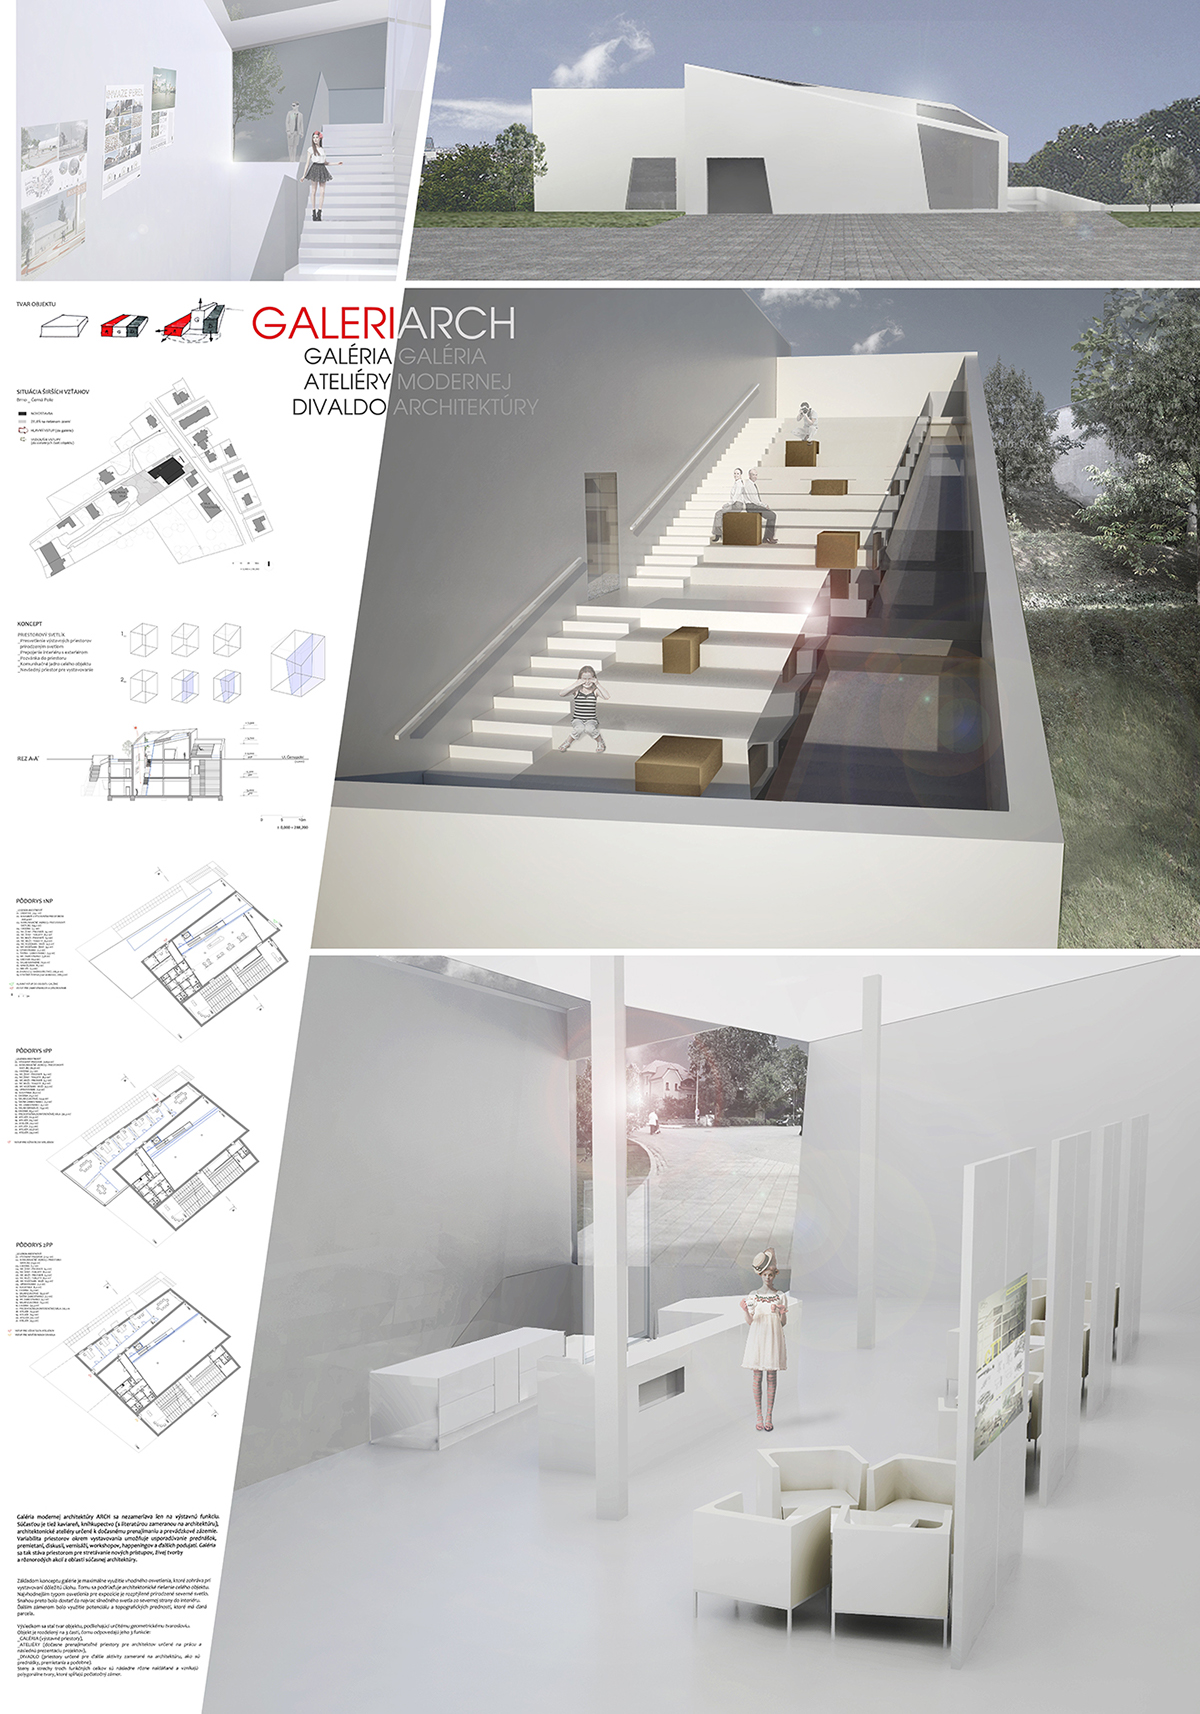 Gallery of Architecture | Bachelor Thesis on Behance